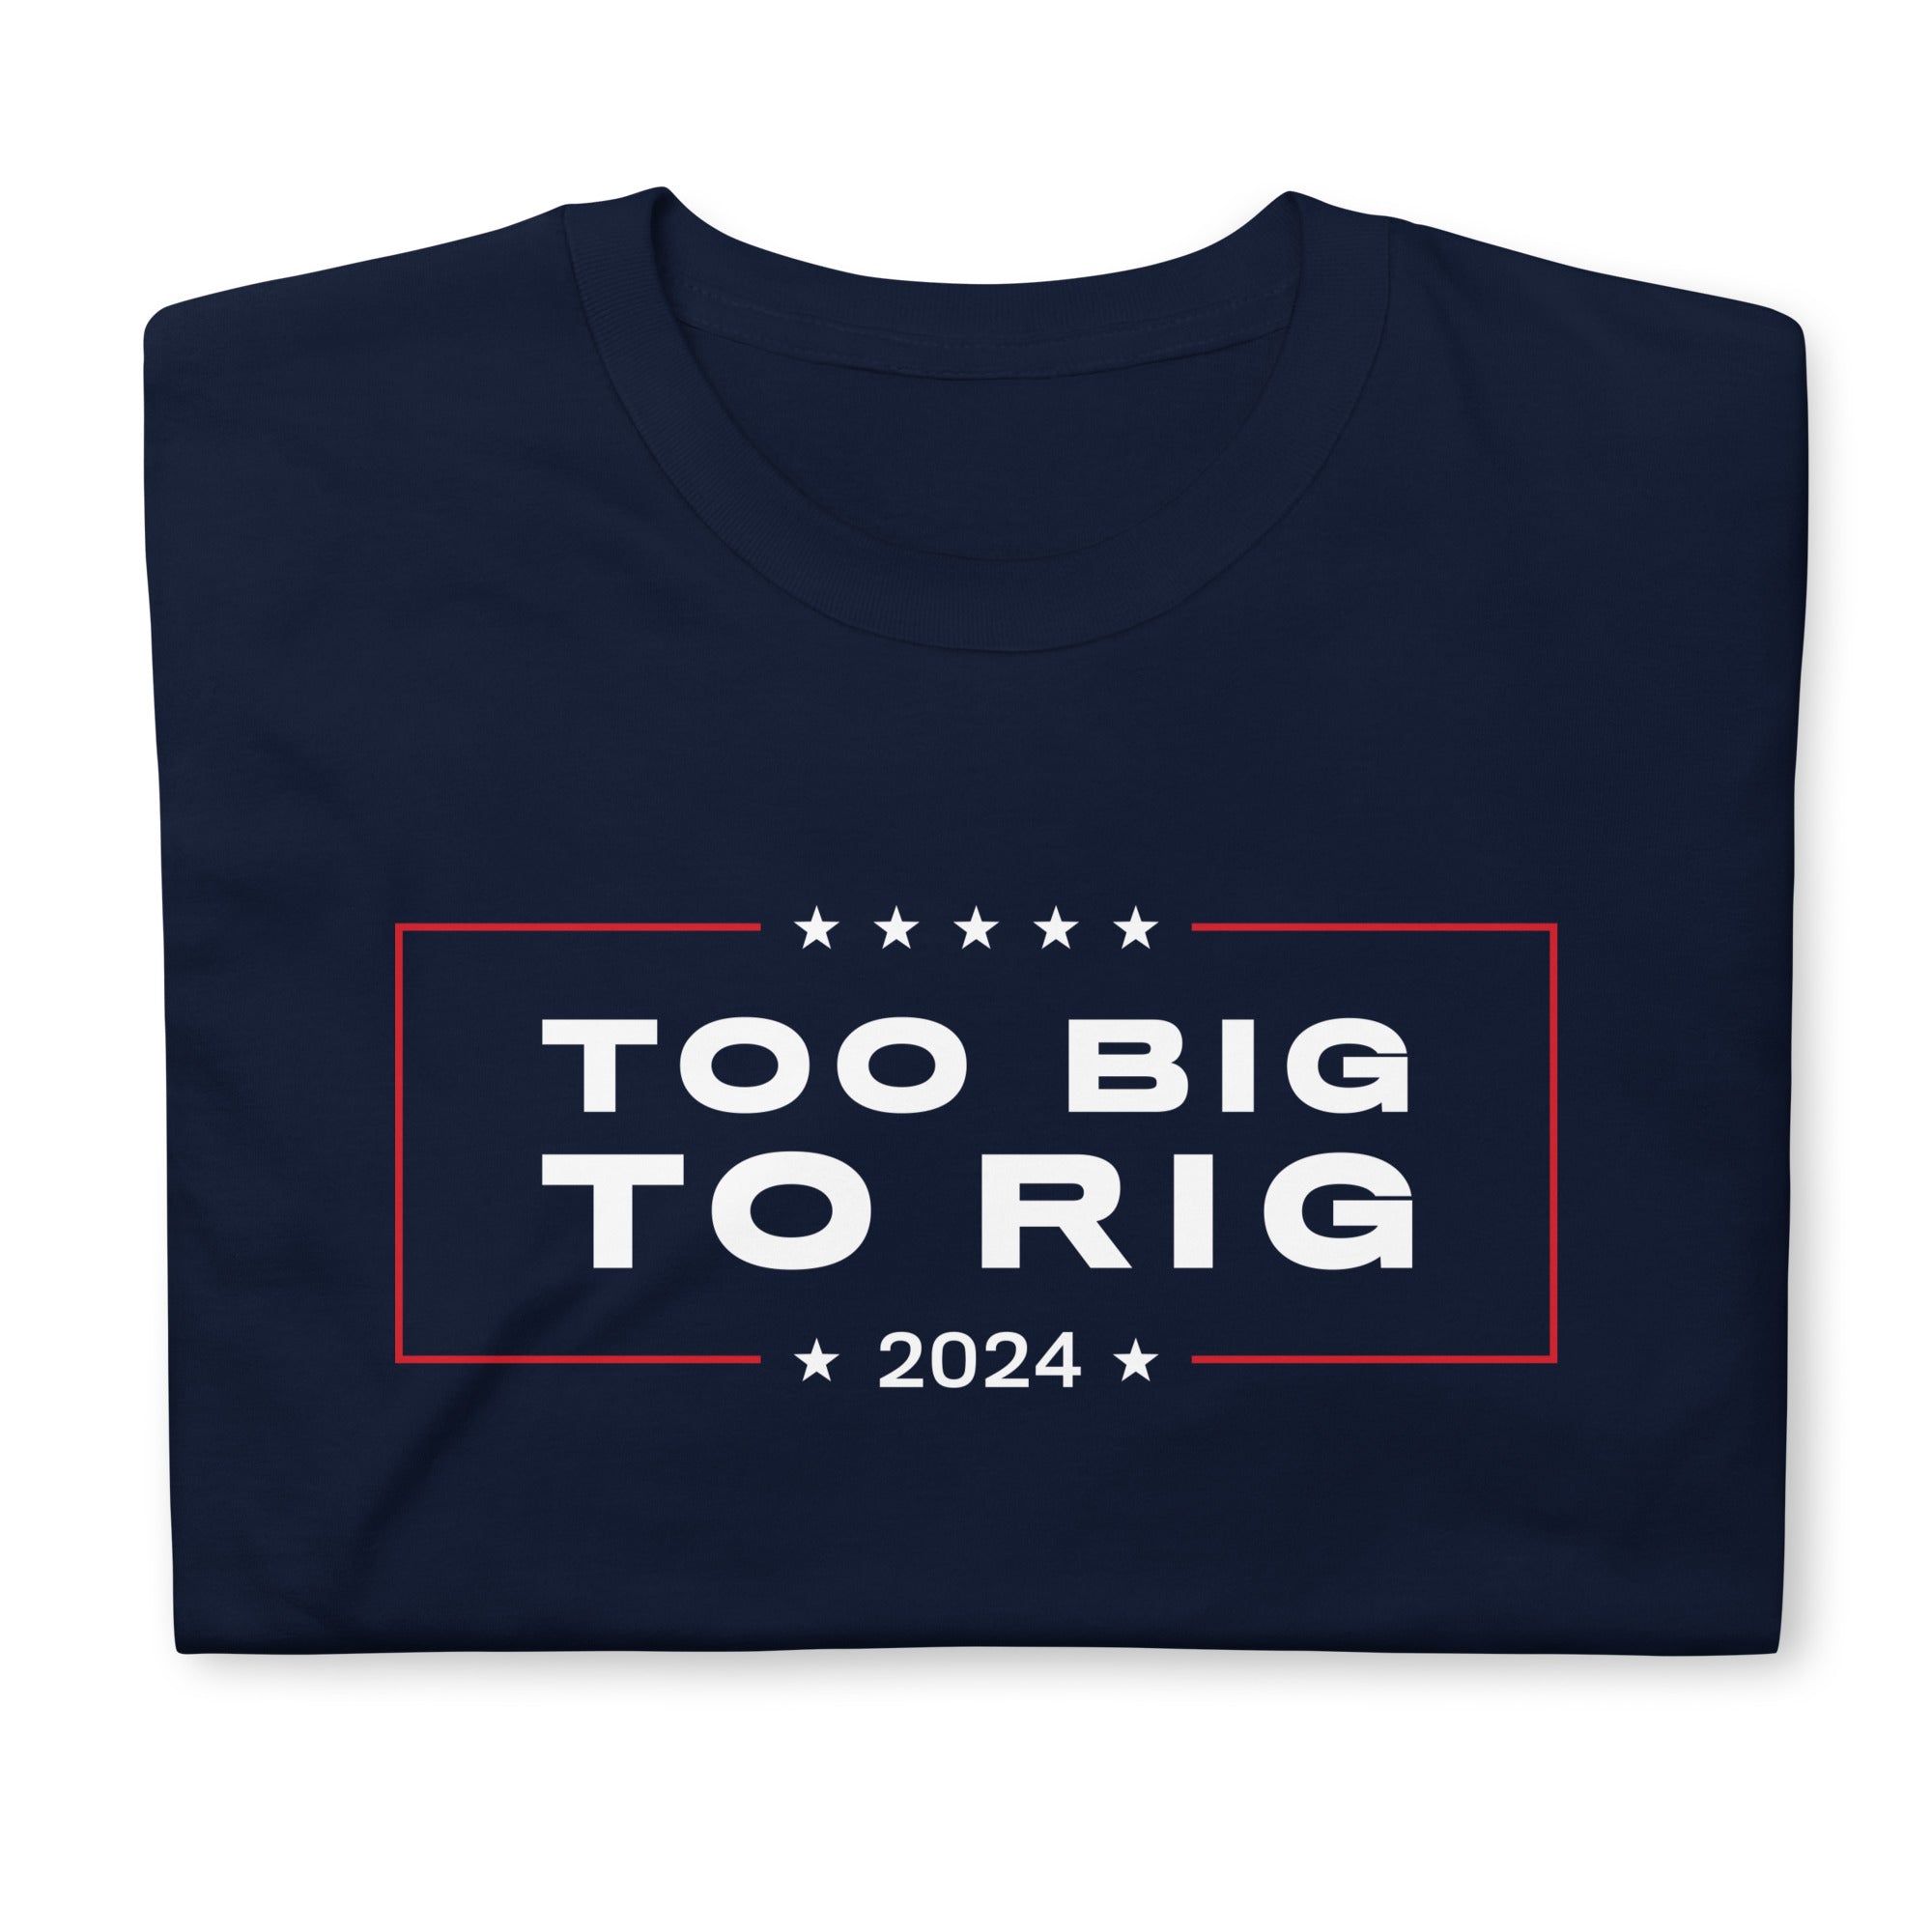 Too Big To Rig 2024 Short-Sleeve T-Shirt